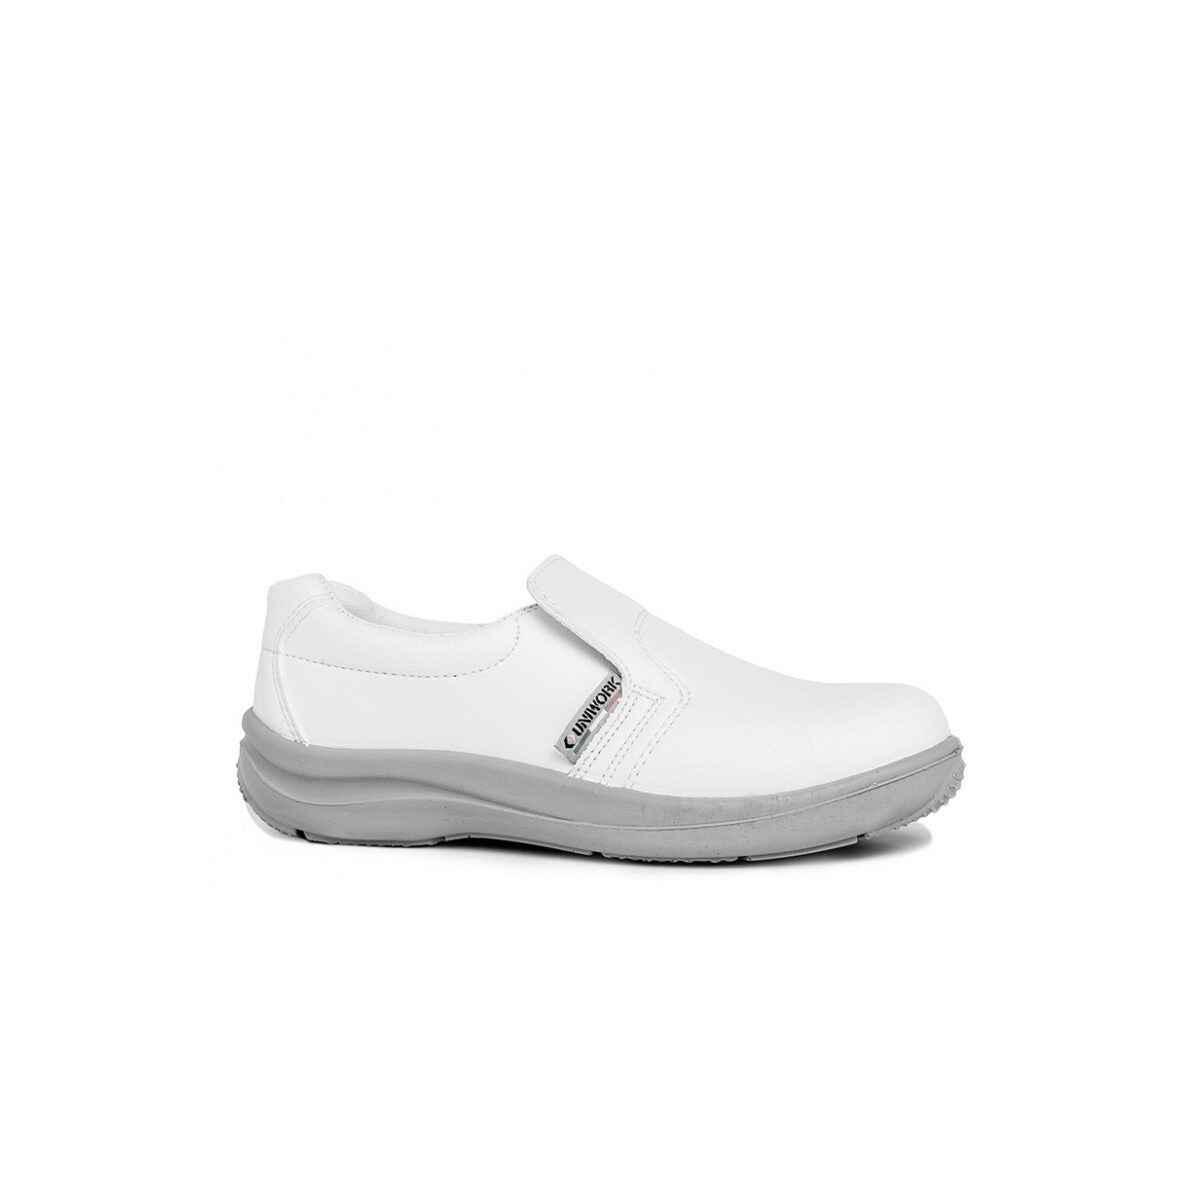 CHAUSSURE SECURIT  MIXTE BLANC TAILLE 42